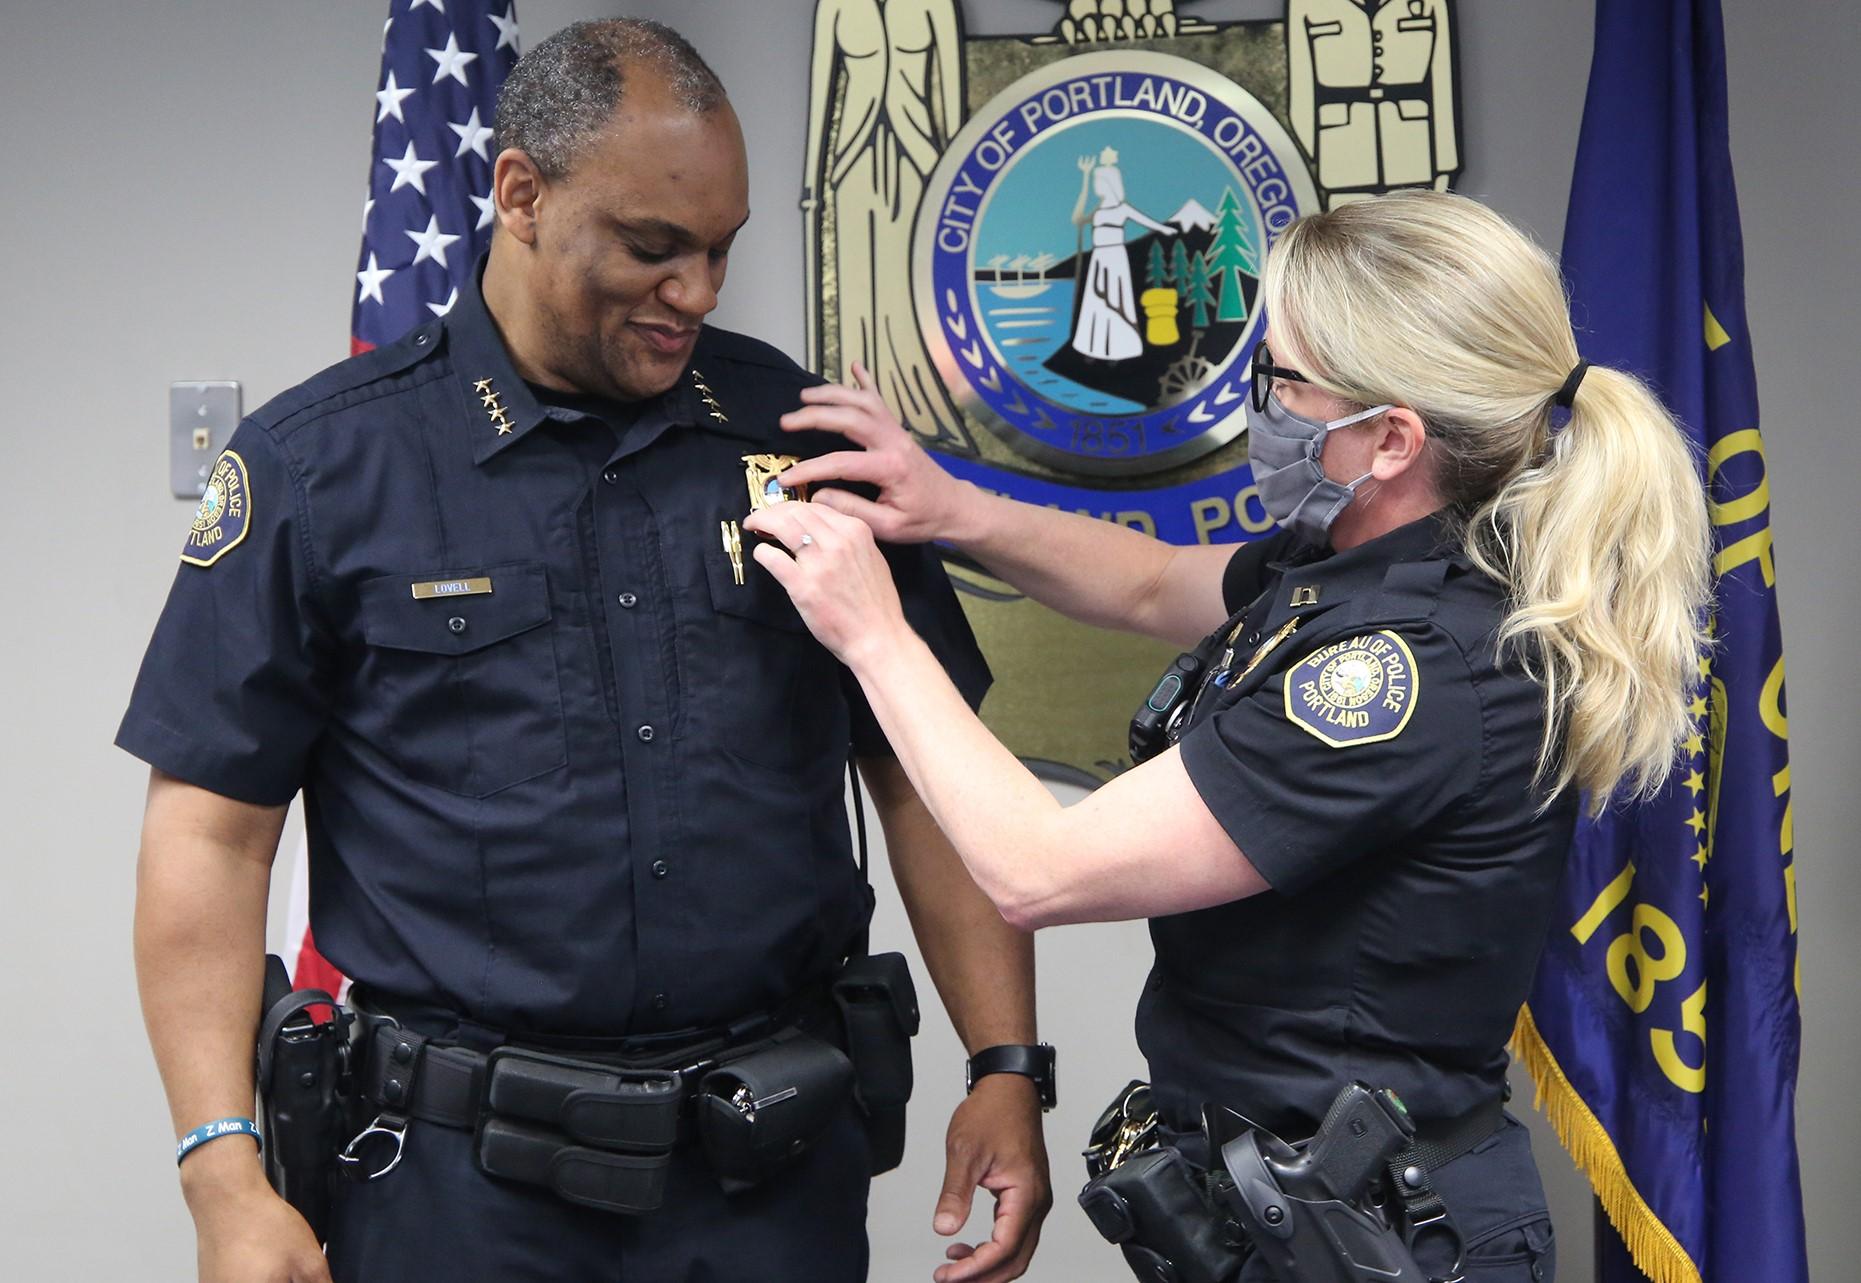 Chuck Lovell (left) is sworn in as Portland Police Bureau Chief on  June 11, 2020. He replaces former chief Jami Resch (right). (Photo courtesy Portland Police Bureau)